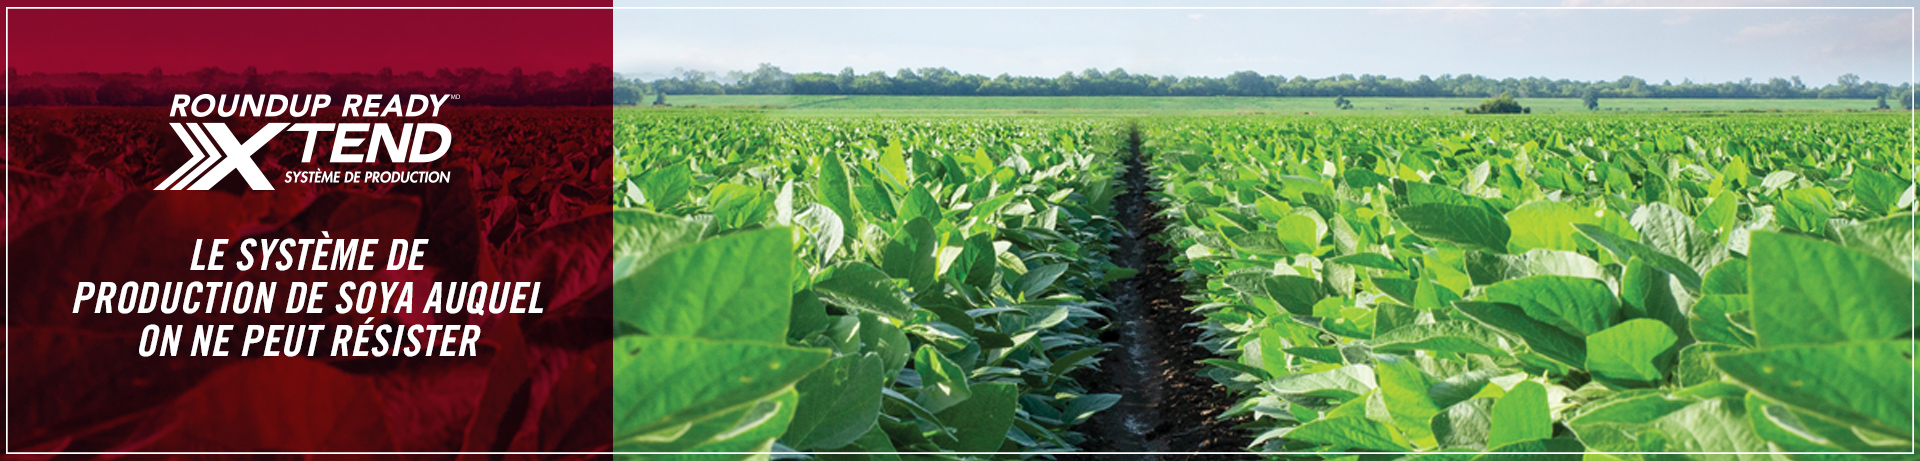 Roundup Ready Xtend Crop System - The soybean system you can't resist